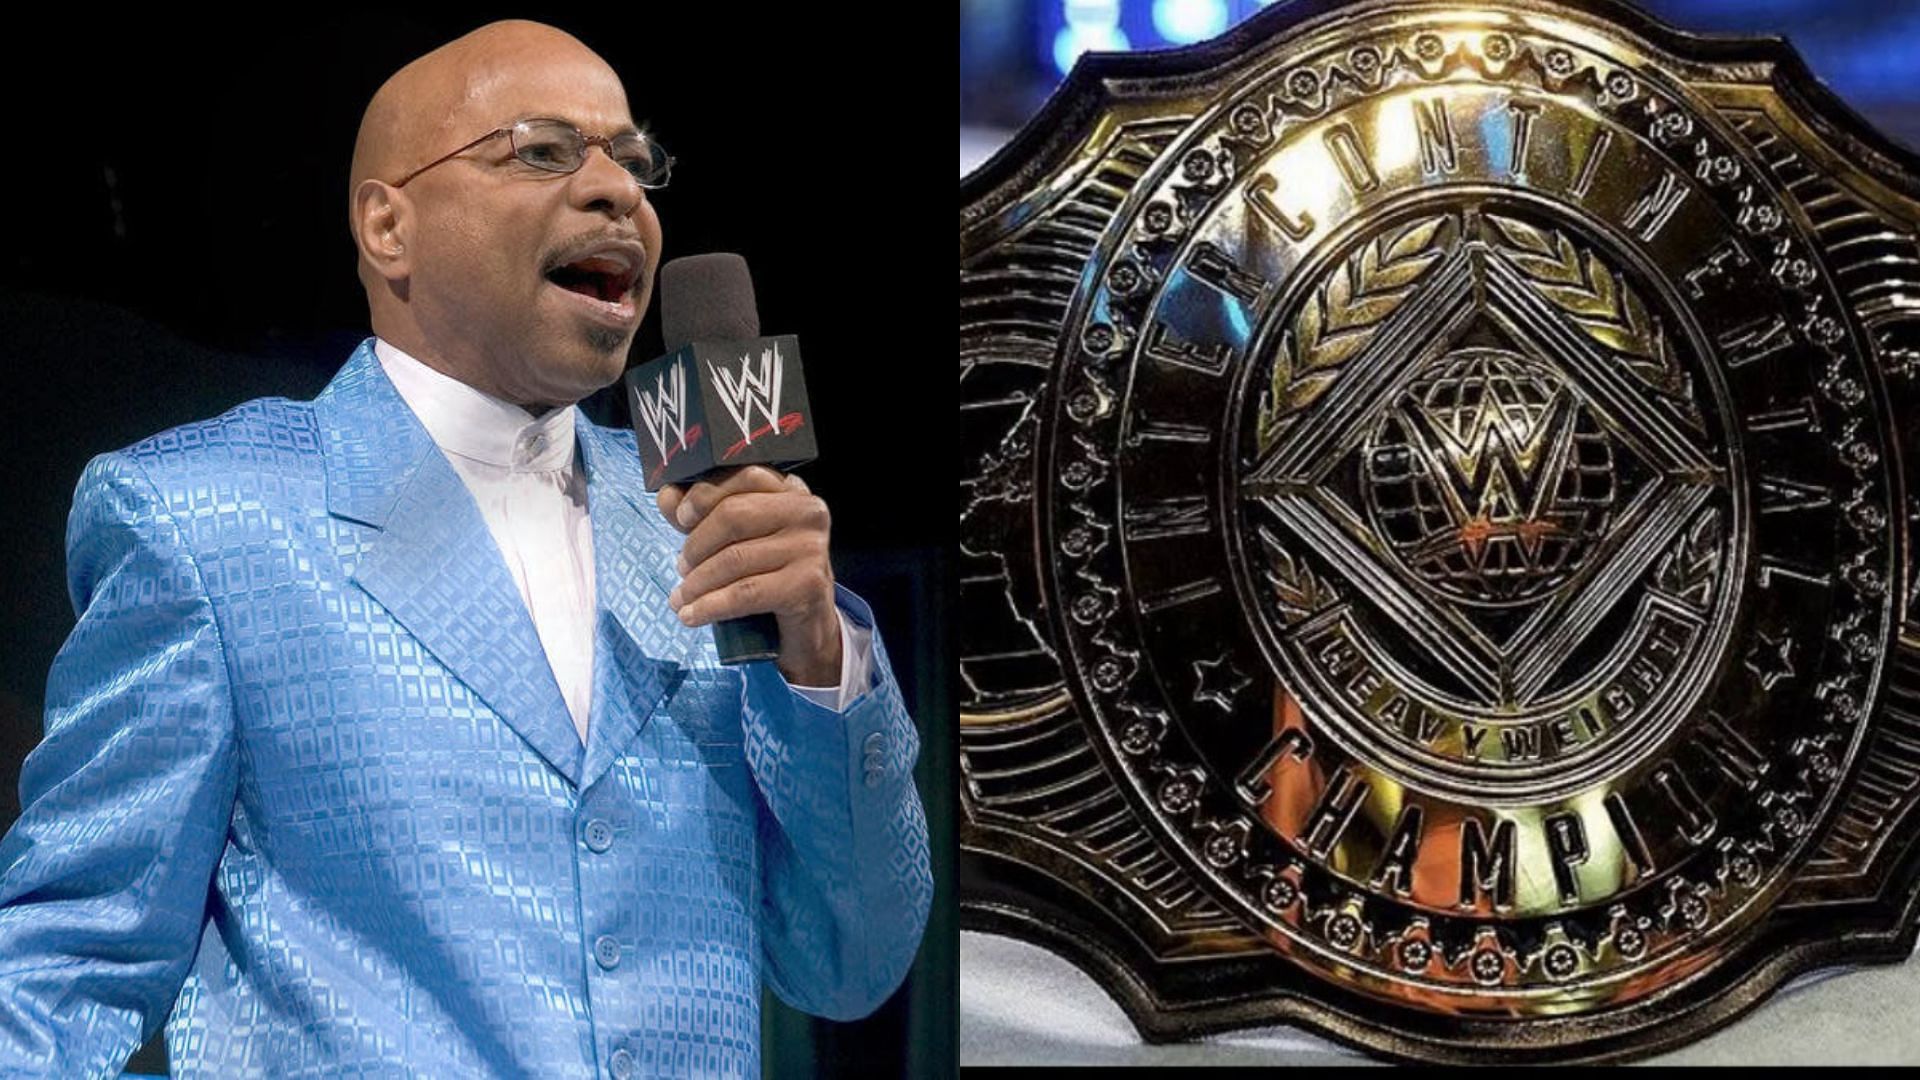 Teddy Long had some interesting thoughts to share this week